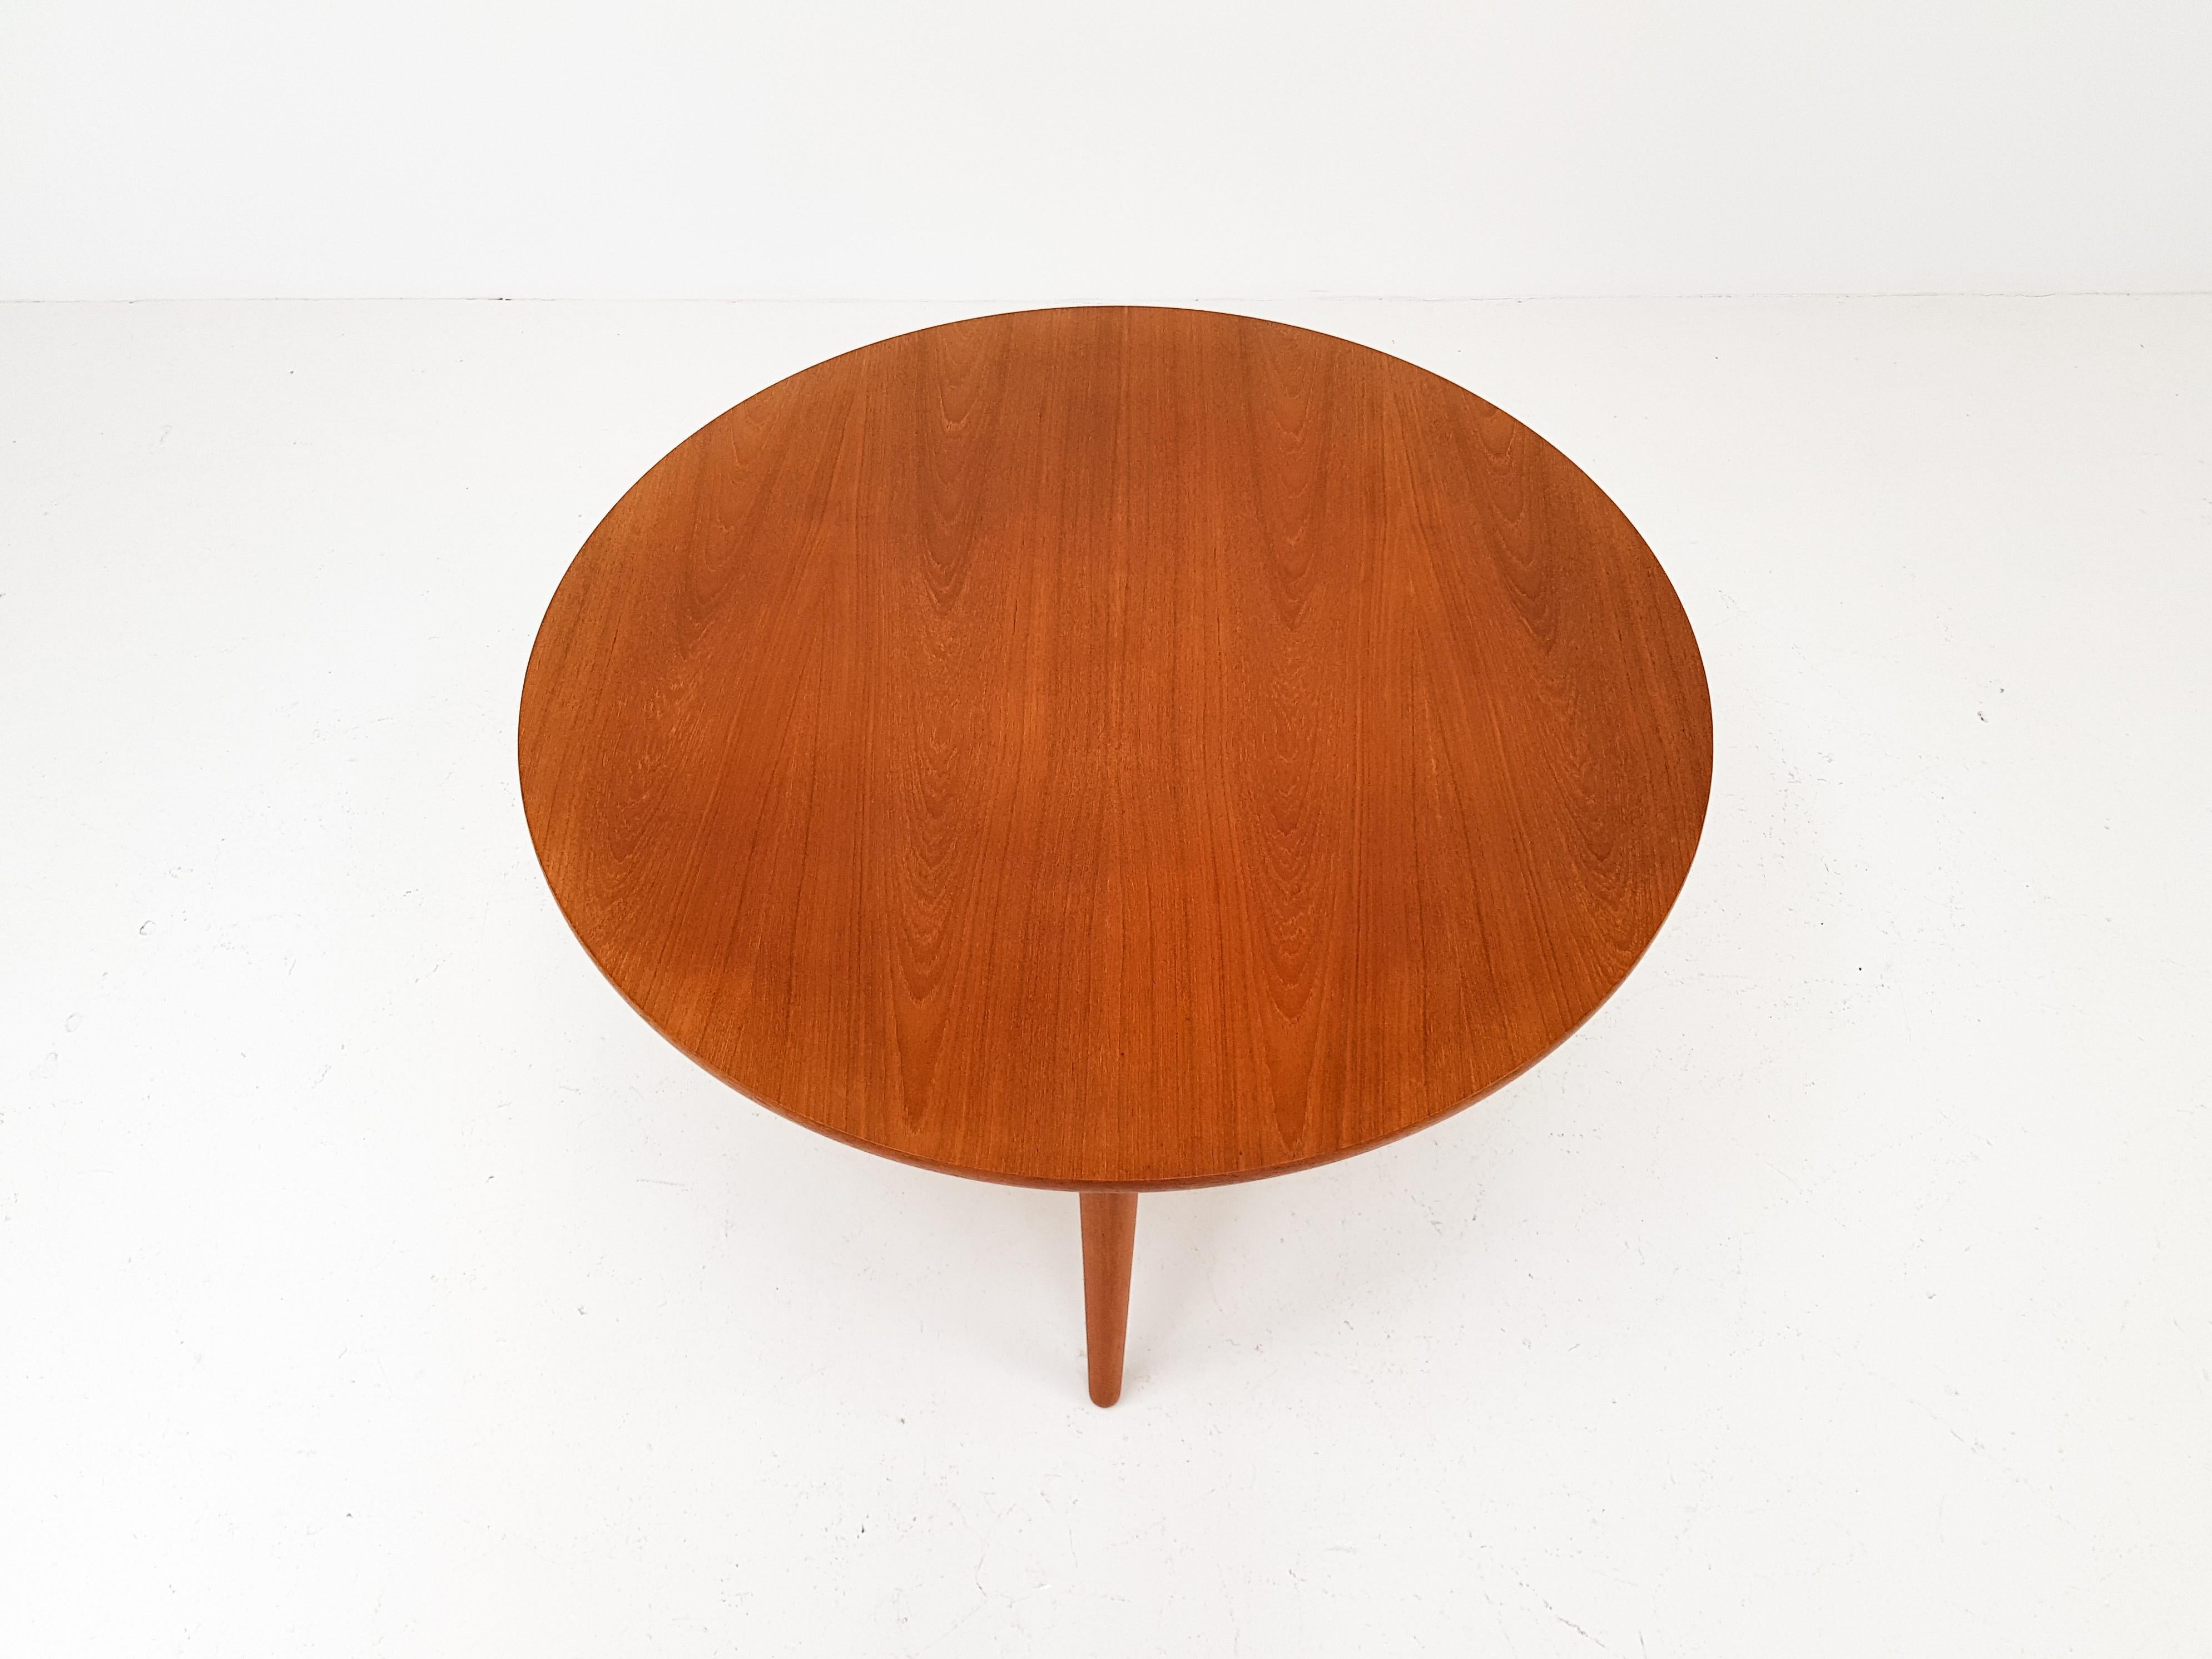 Hans J. Wegner At-8 Teak Coffee Table for Andreas Tuck, 1960s In Good Condition In London Road, Baldock, Hertfordshire